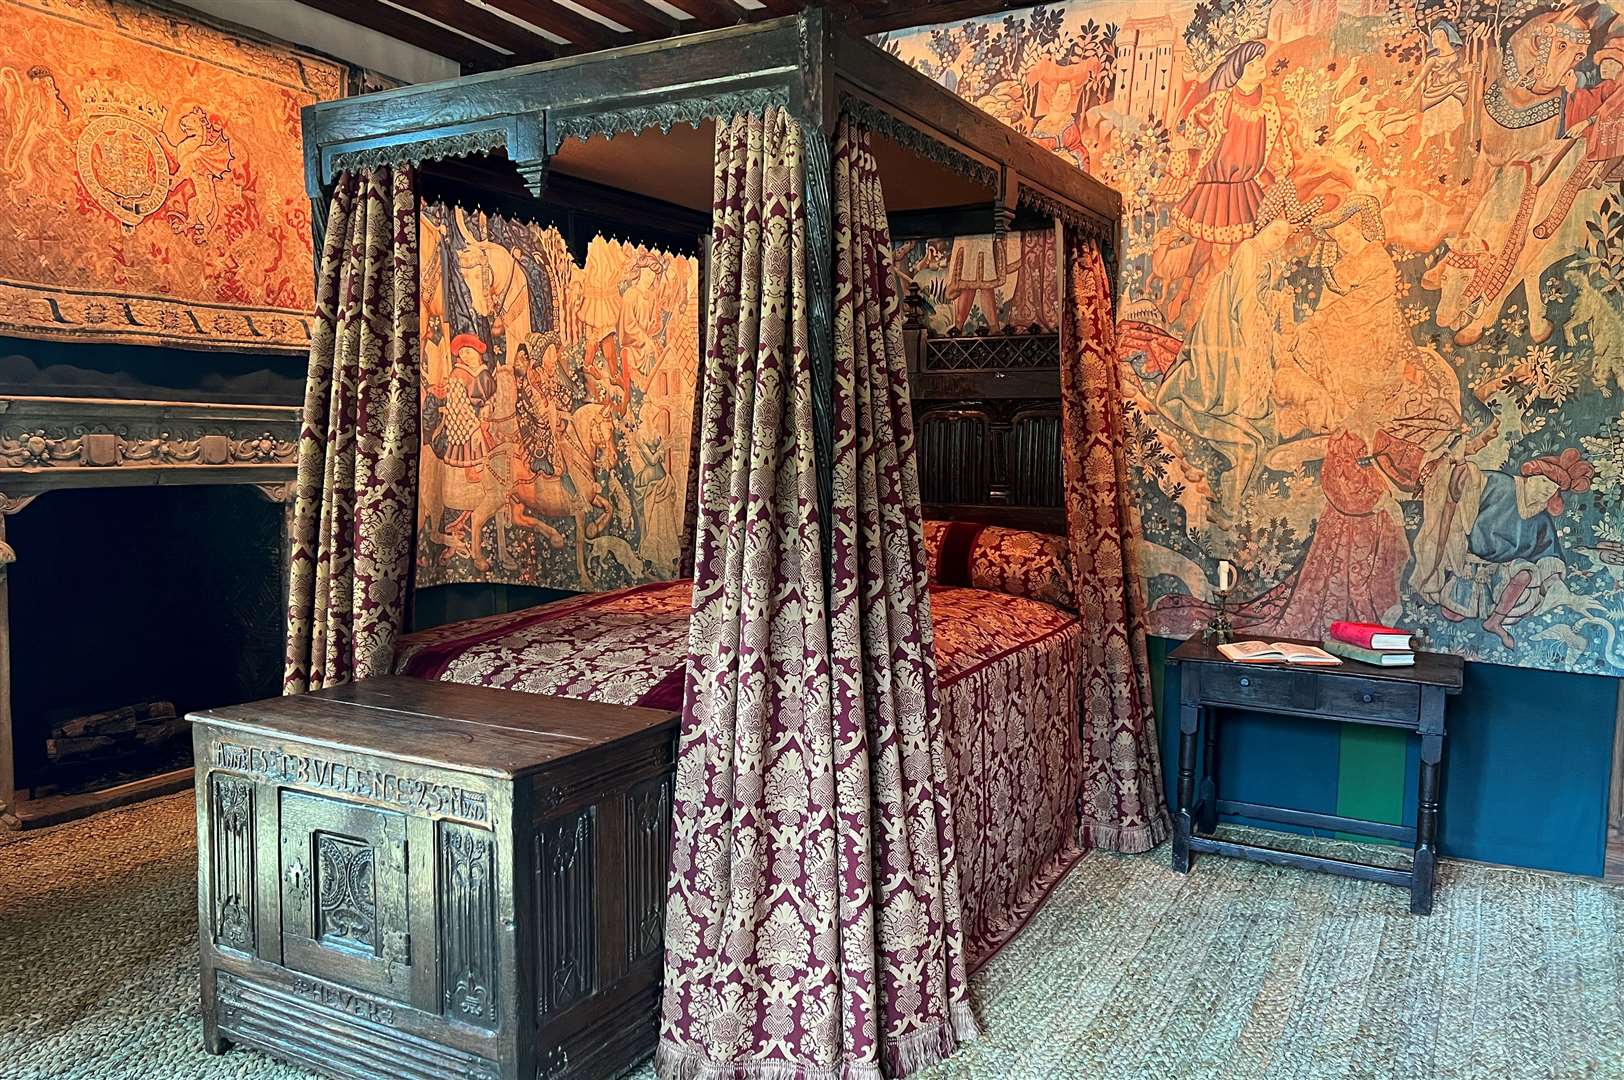 The Best Bedchamber is where historians believe Anne Boleyn would have read love letters from her future husband, King Henry VIII. Picture: Hever Castle and Gardens